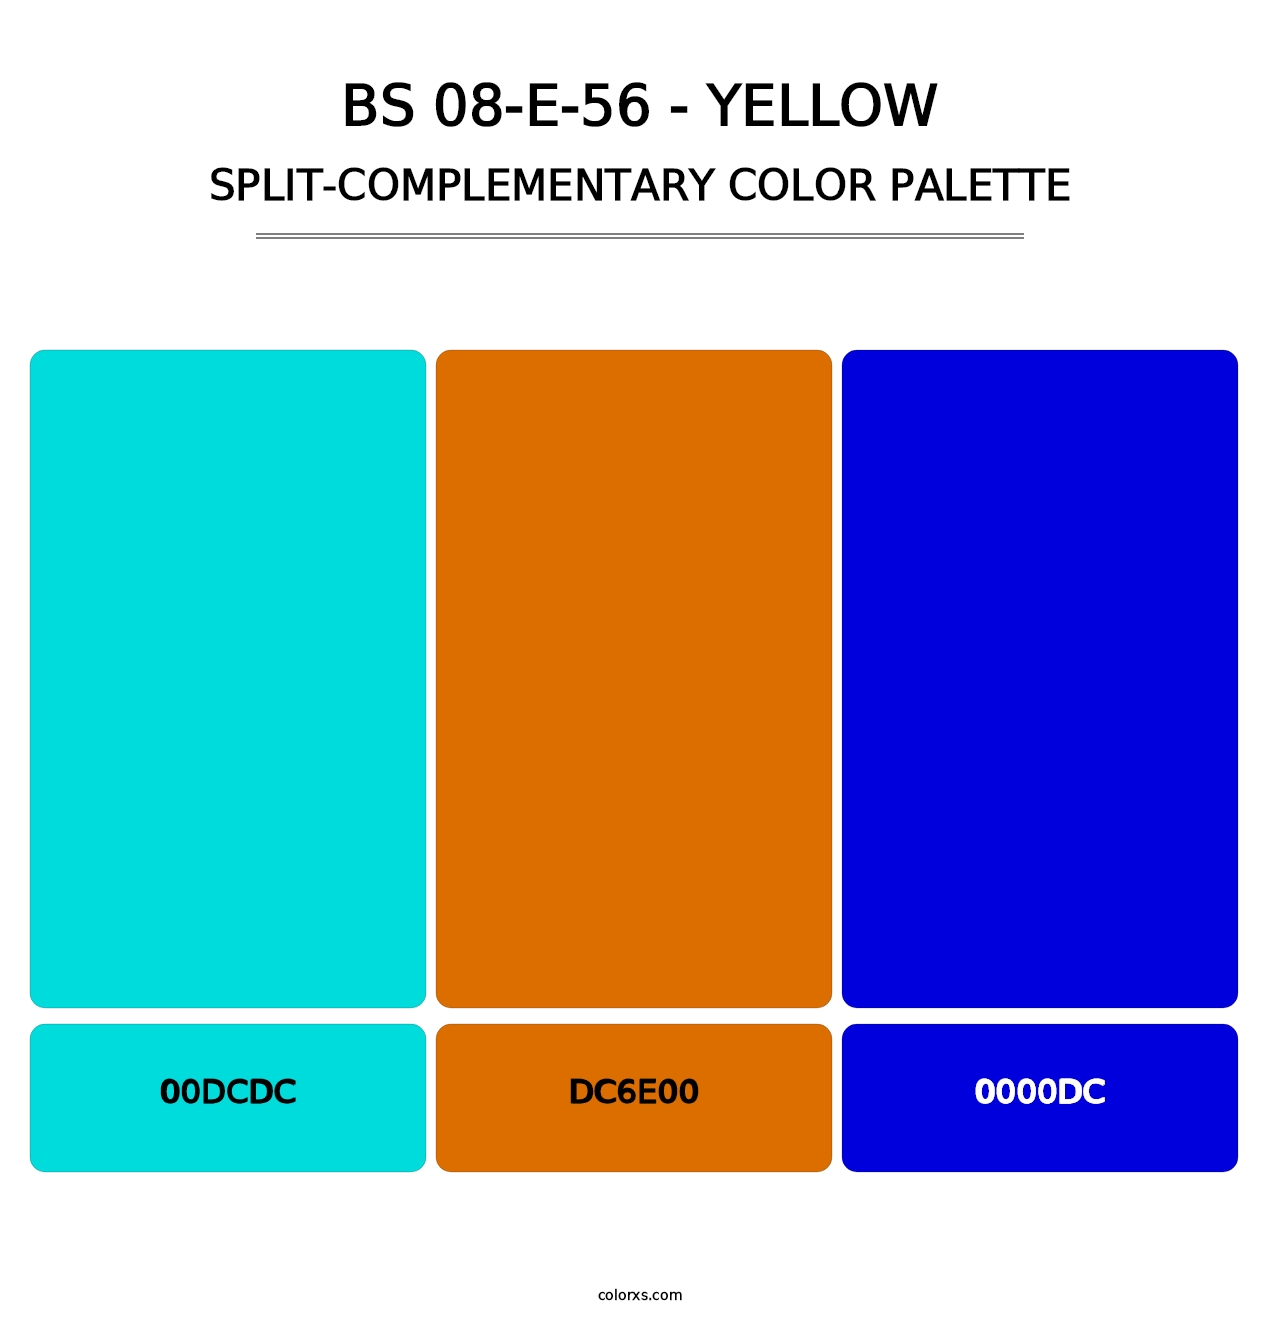 BS 08-E-56 - Yellow - Split-Complementary Color Palette